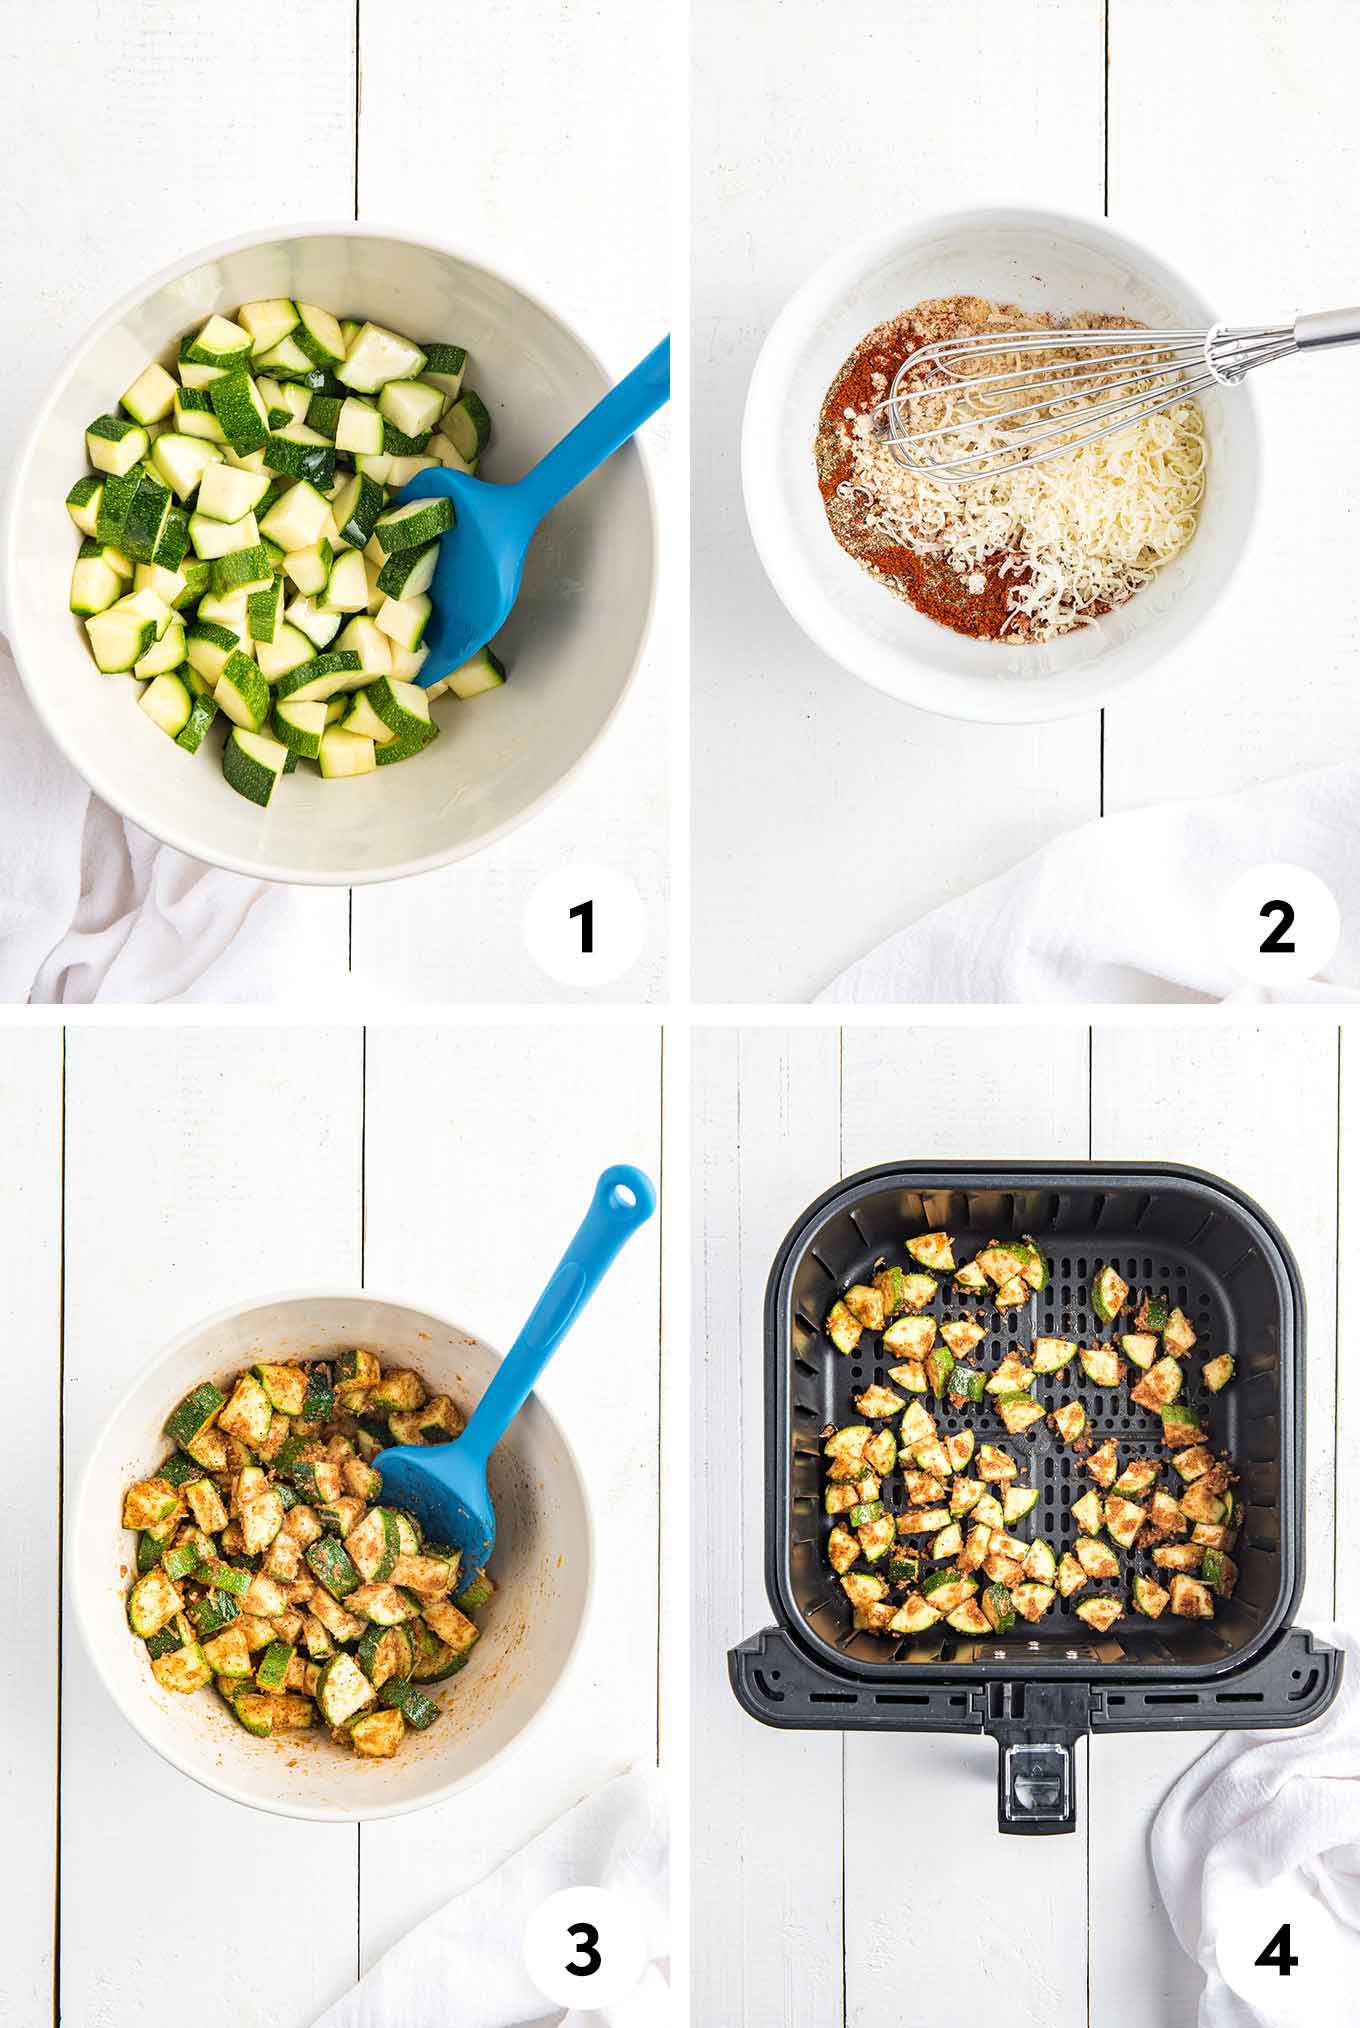 A collage of steps to make air fried zucchini from zucchini in the bowl, mixing the seasoning, toss it, and in the air fryer basket.